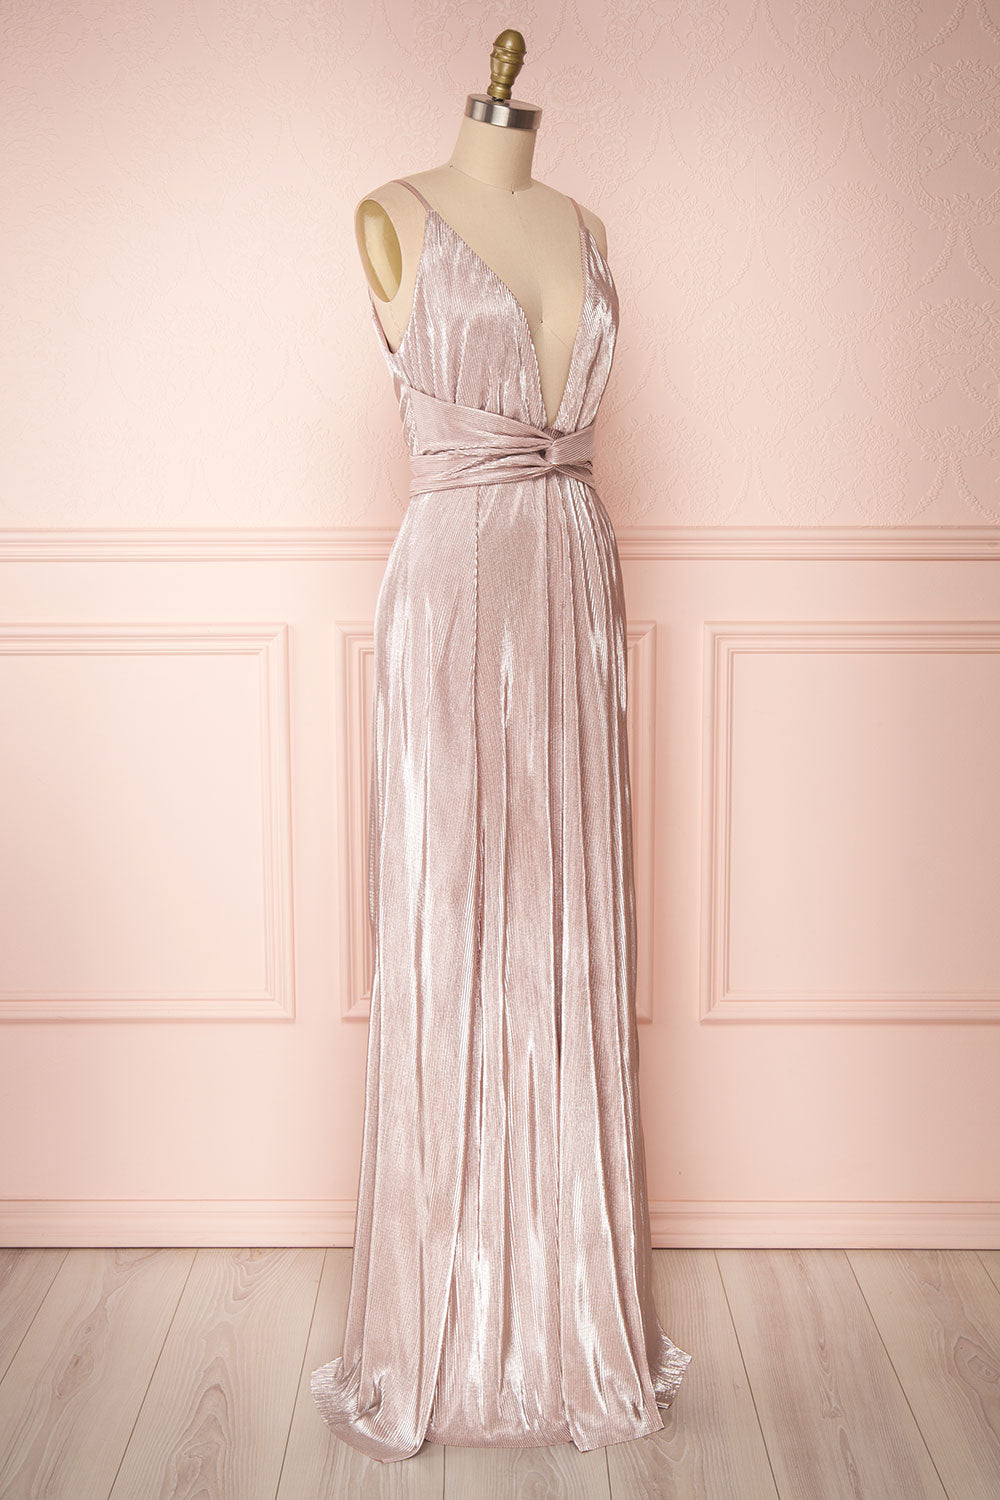 Ismene Lilac Metallic A-Line Gown with High Slits | Boutique 1861 side view 